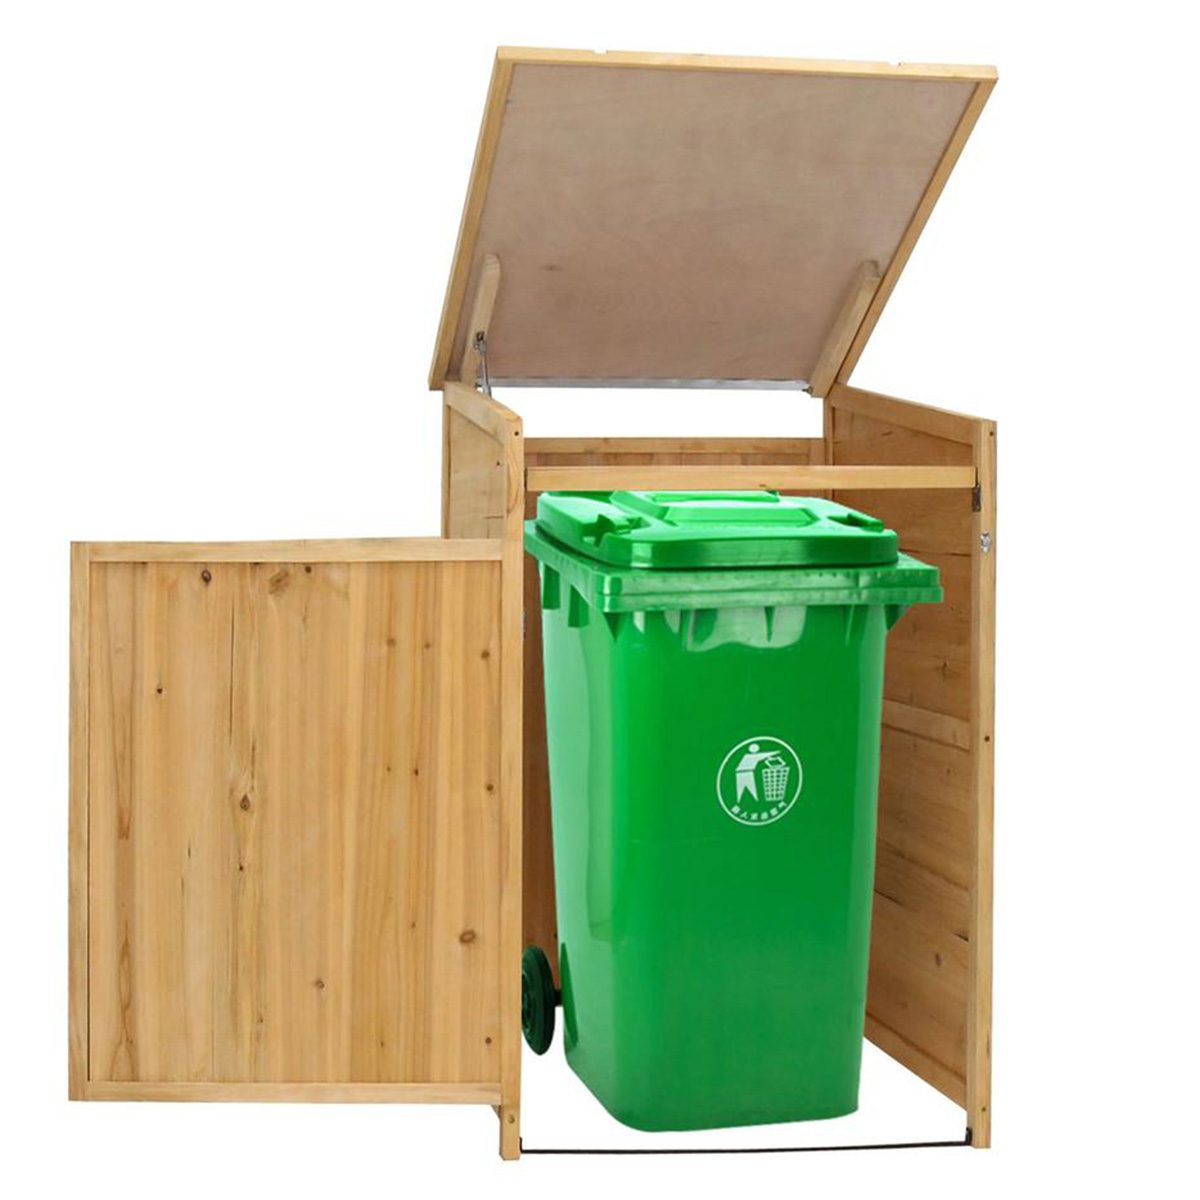 Storage shed for trash cans
 